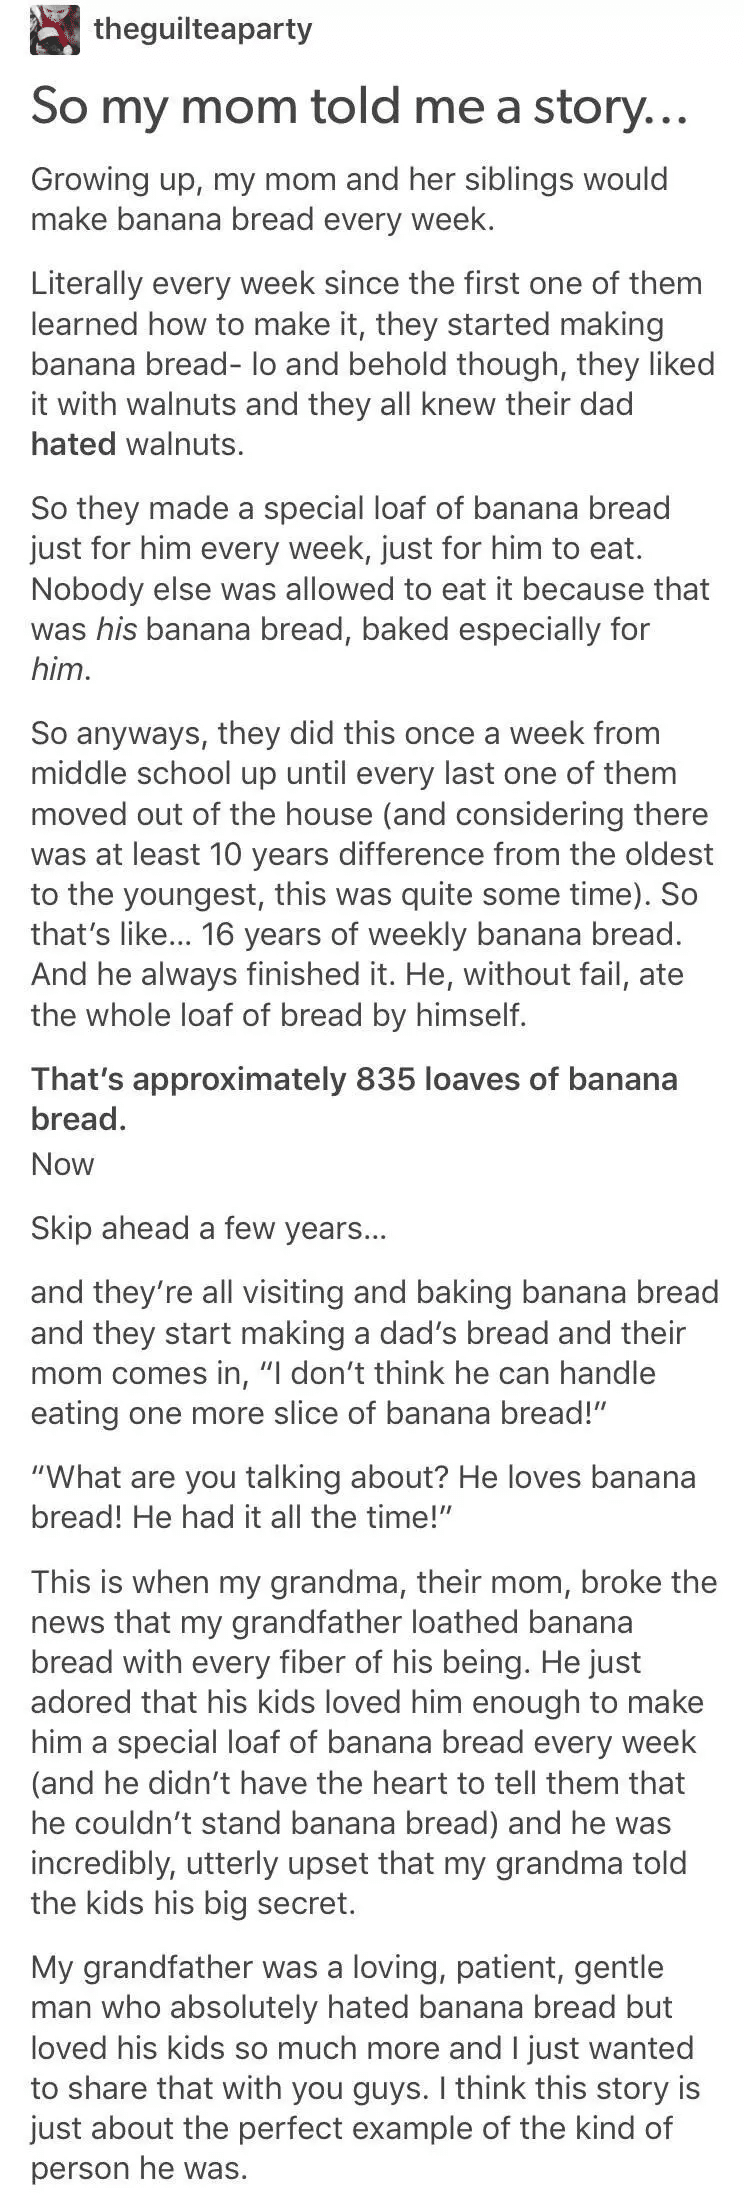 cute wholesome-memes cute text: theguilteaparty So my mom told me a story.. Growing up, my mom and her siblings would make banana bread every week. Literally every week since the first one of them learned how to make it, they started making banana bread- 10 and behold though, they liked it with walnuts and they all knew their dad hated walnuts. So they made a special loaf of banana bread just for him every week, just for him to eat. Nobody else was allowed to eat it because that was his banana bread, baked especially for him. So anyways, they did this once a week from middle school up until every last one of them moved out of the house (and considering there was at least 10 years difference from the oldest to the youngest, this was quite some time). So that's like... 16 years of weekly banana bread. And he always finished it. He, without fail, ate the whole loaf of bread by himself. That's approximately 835 loaves of banana bread. Now Skip ahead a few years... and they're all visiting and baking banana bread and they start making a dad's bread and their mom comes in, 